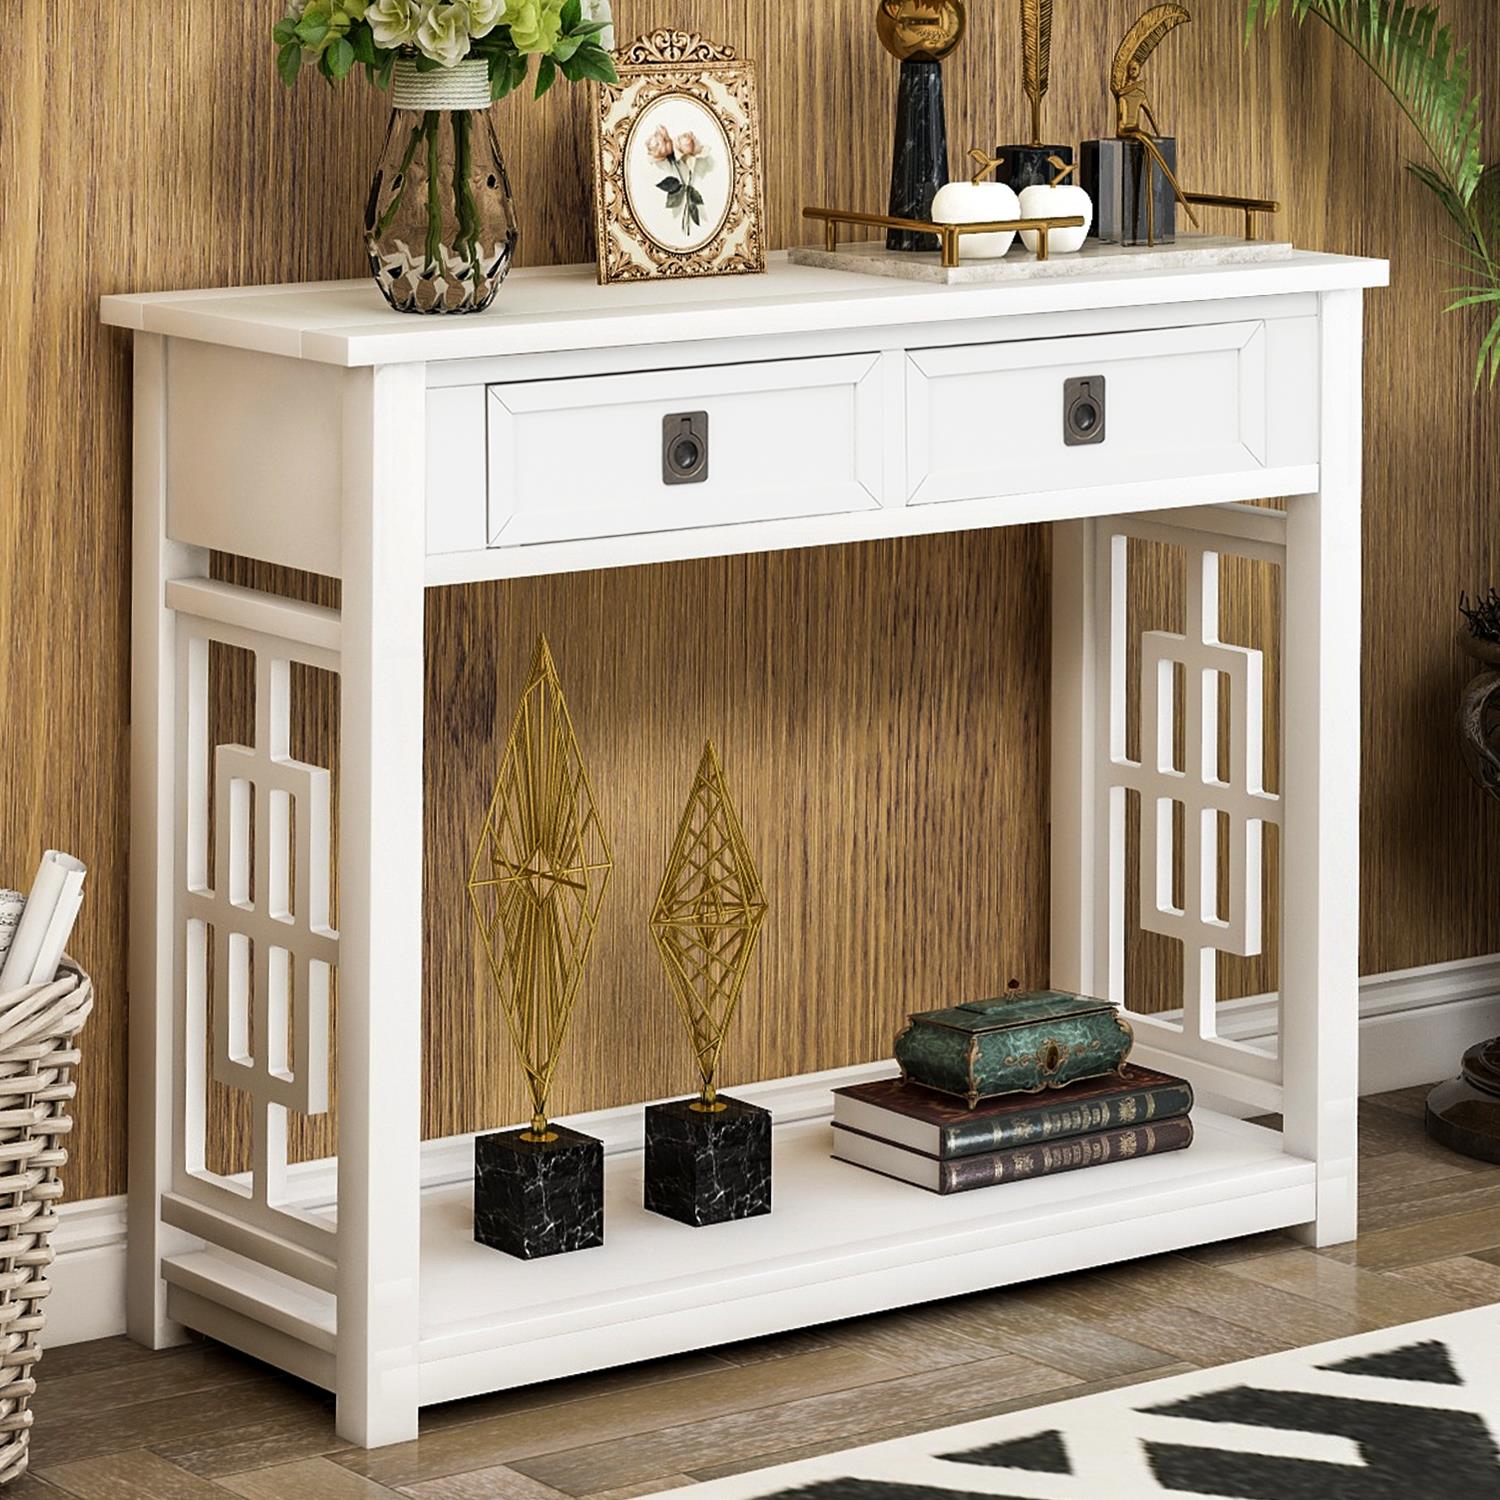 Zimtown Contemporary Console Table Sofa Table Side Desk with Two Drawers and Bottom Shelf - image 1 of 9